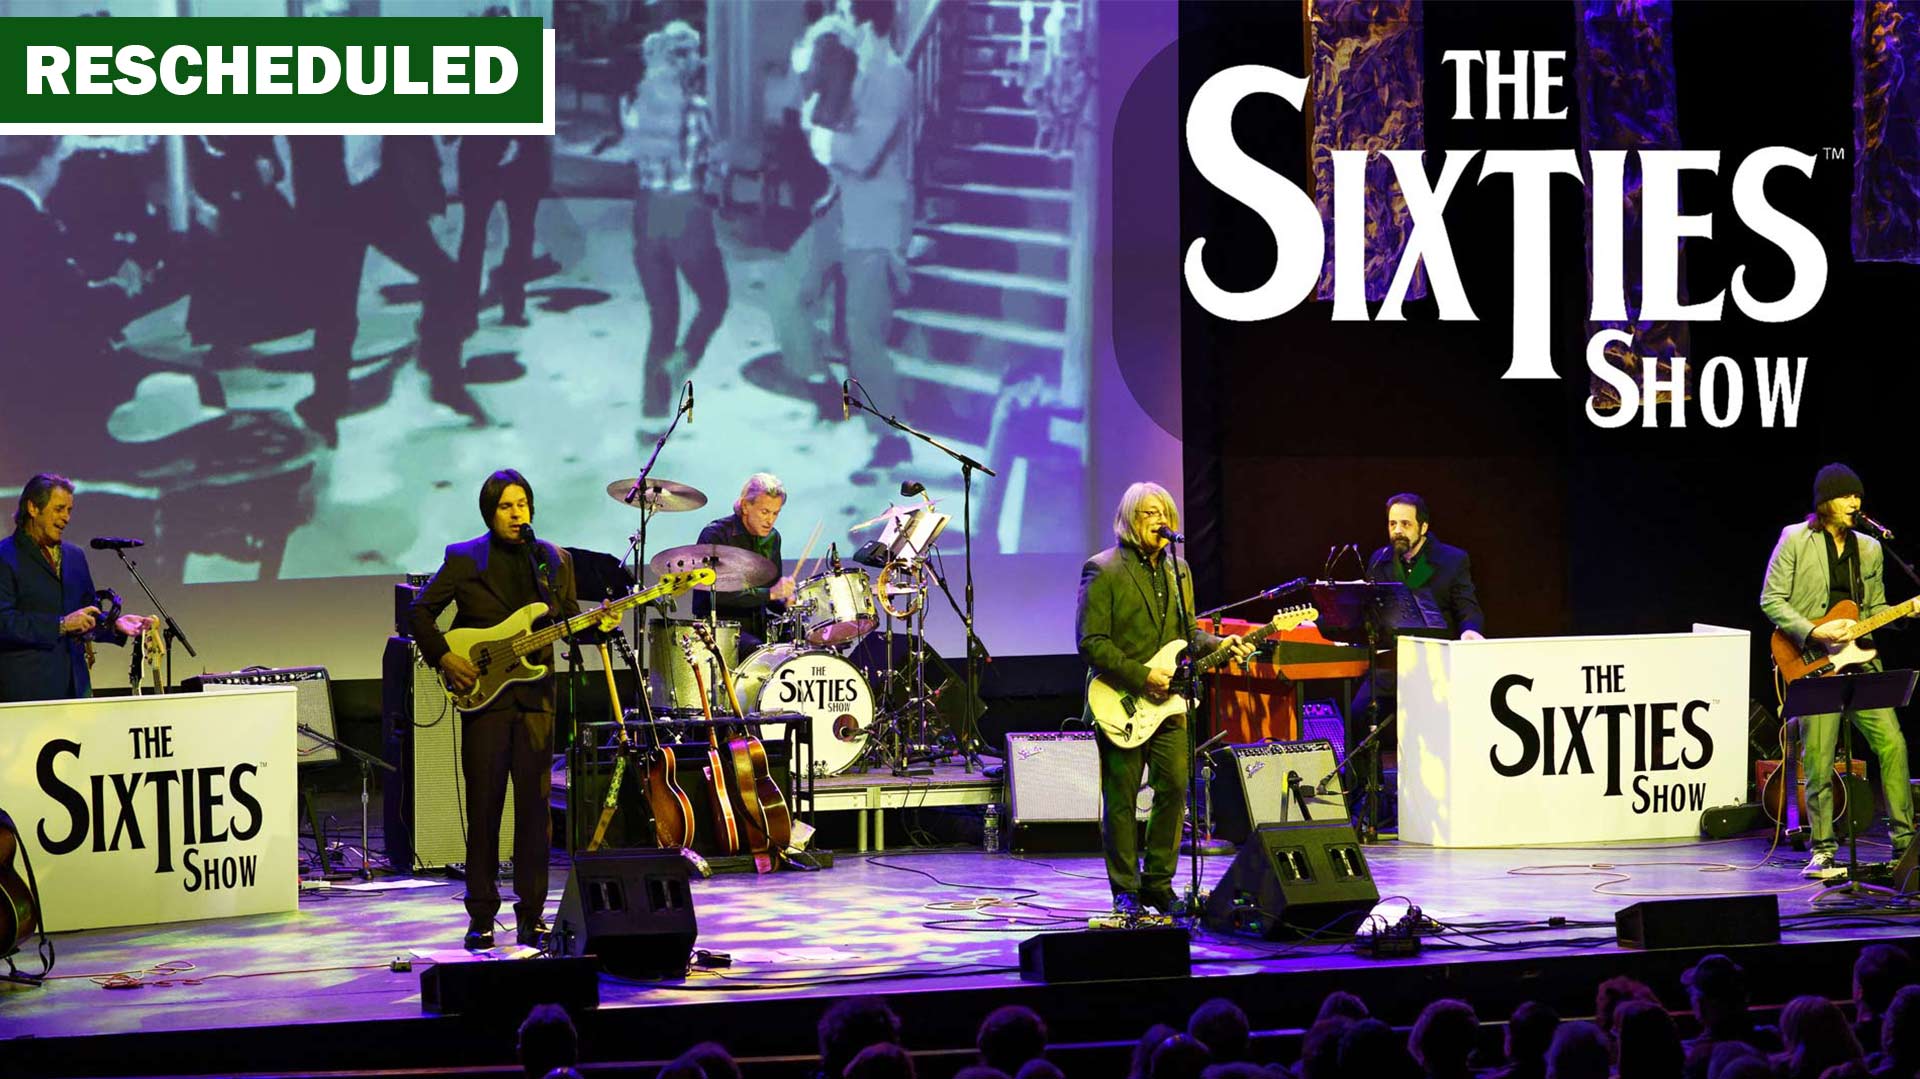 The Sixties Show - Rescheduled to March 18, 2023